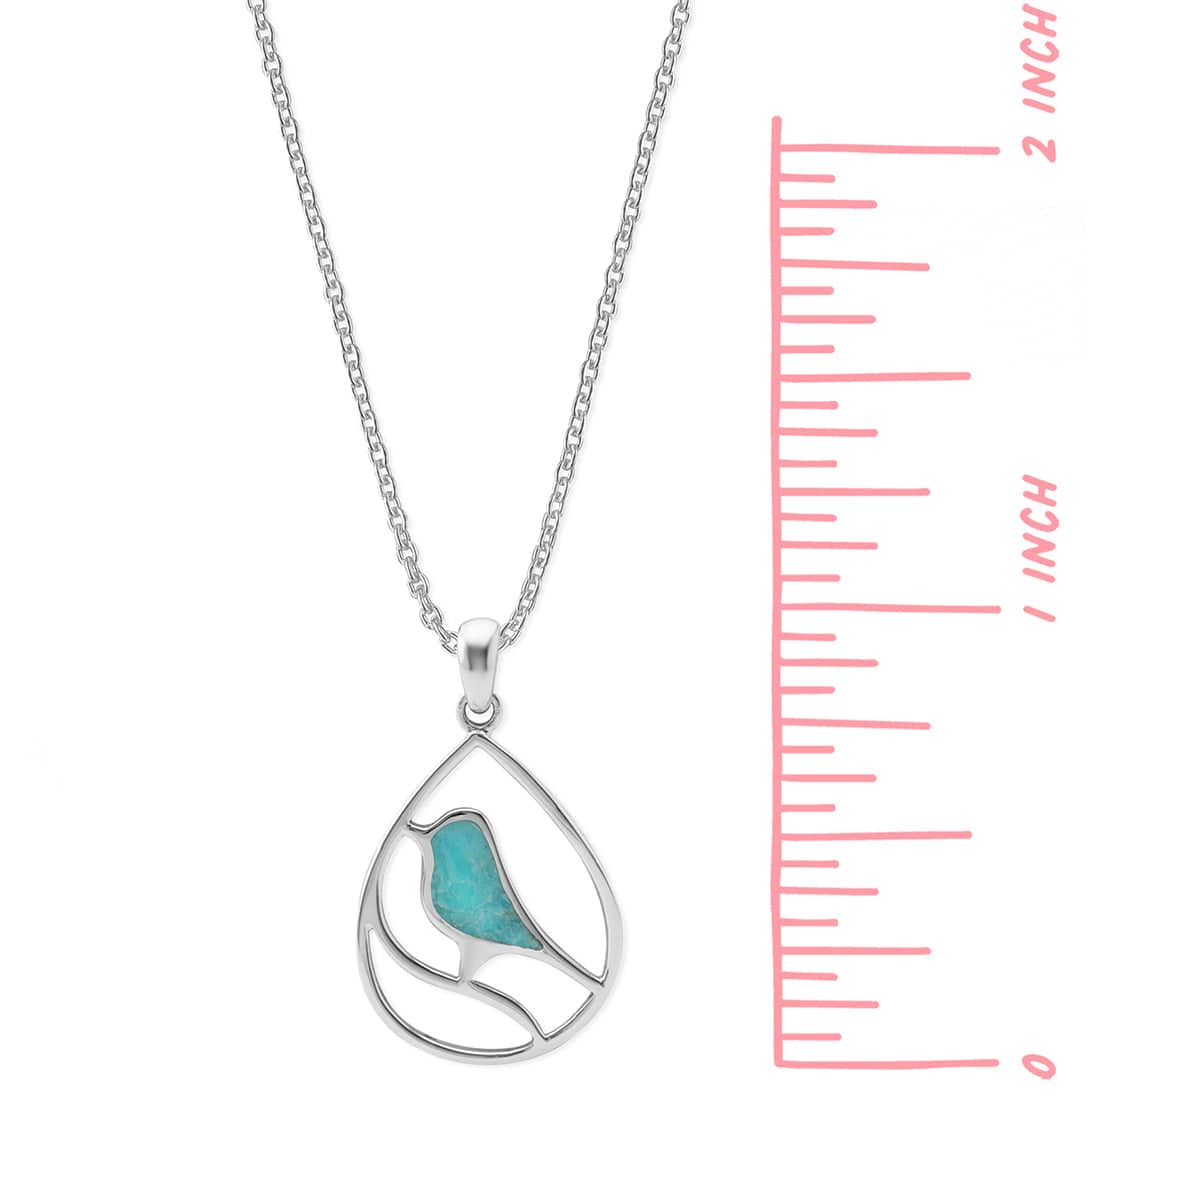 Boma Jewelry Necklaces Turquoise Bird Necklace